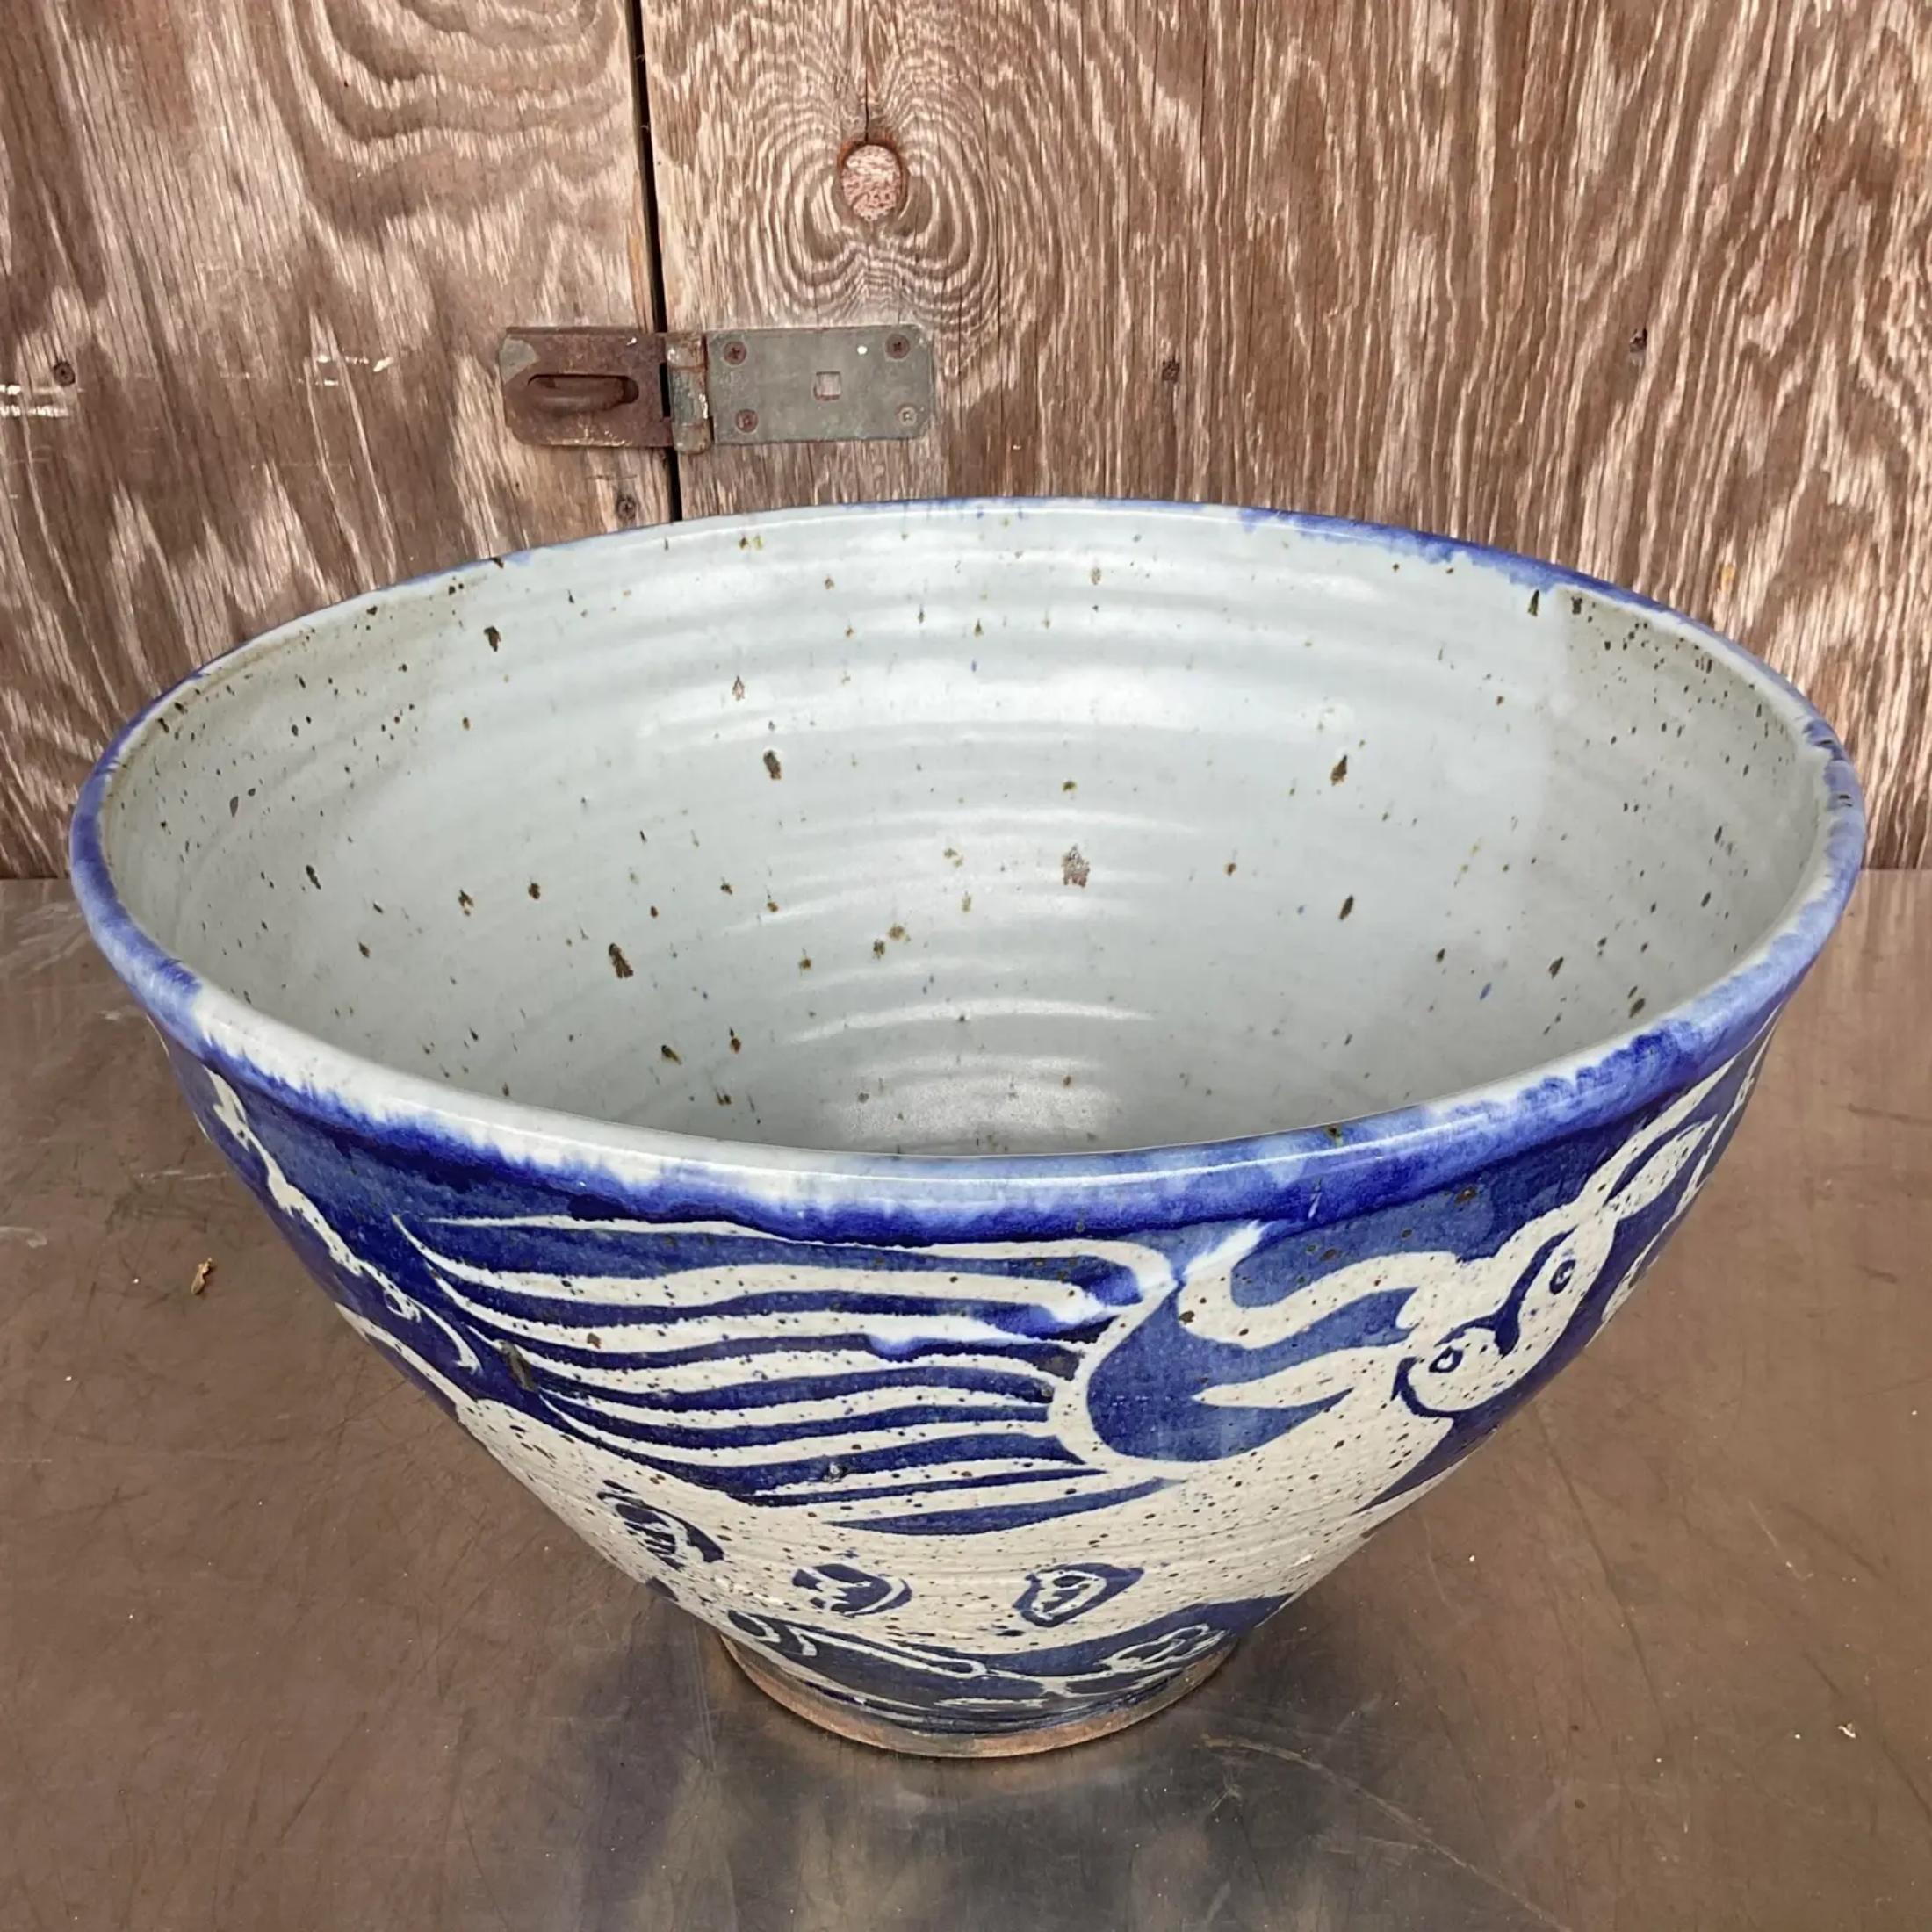 A fabulous vintage matte glazed ceramic bowl. A chic hand made terra Cotta piece with beautiful hand painted animals detail. Signed on the bottom. Acquired from a Palm Beach estate